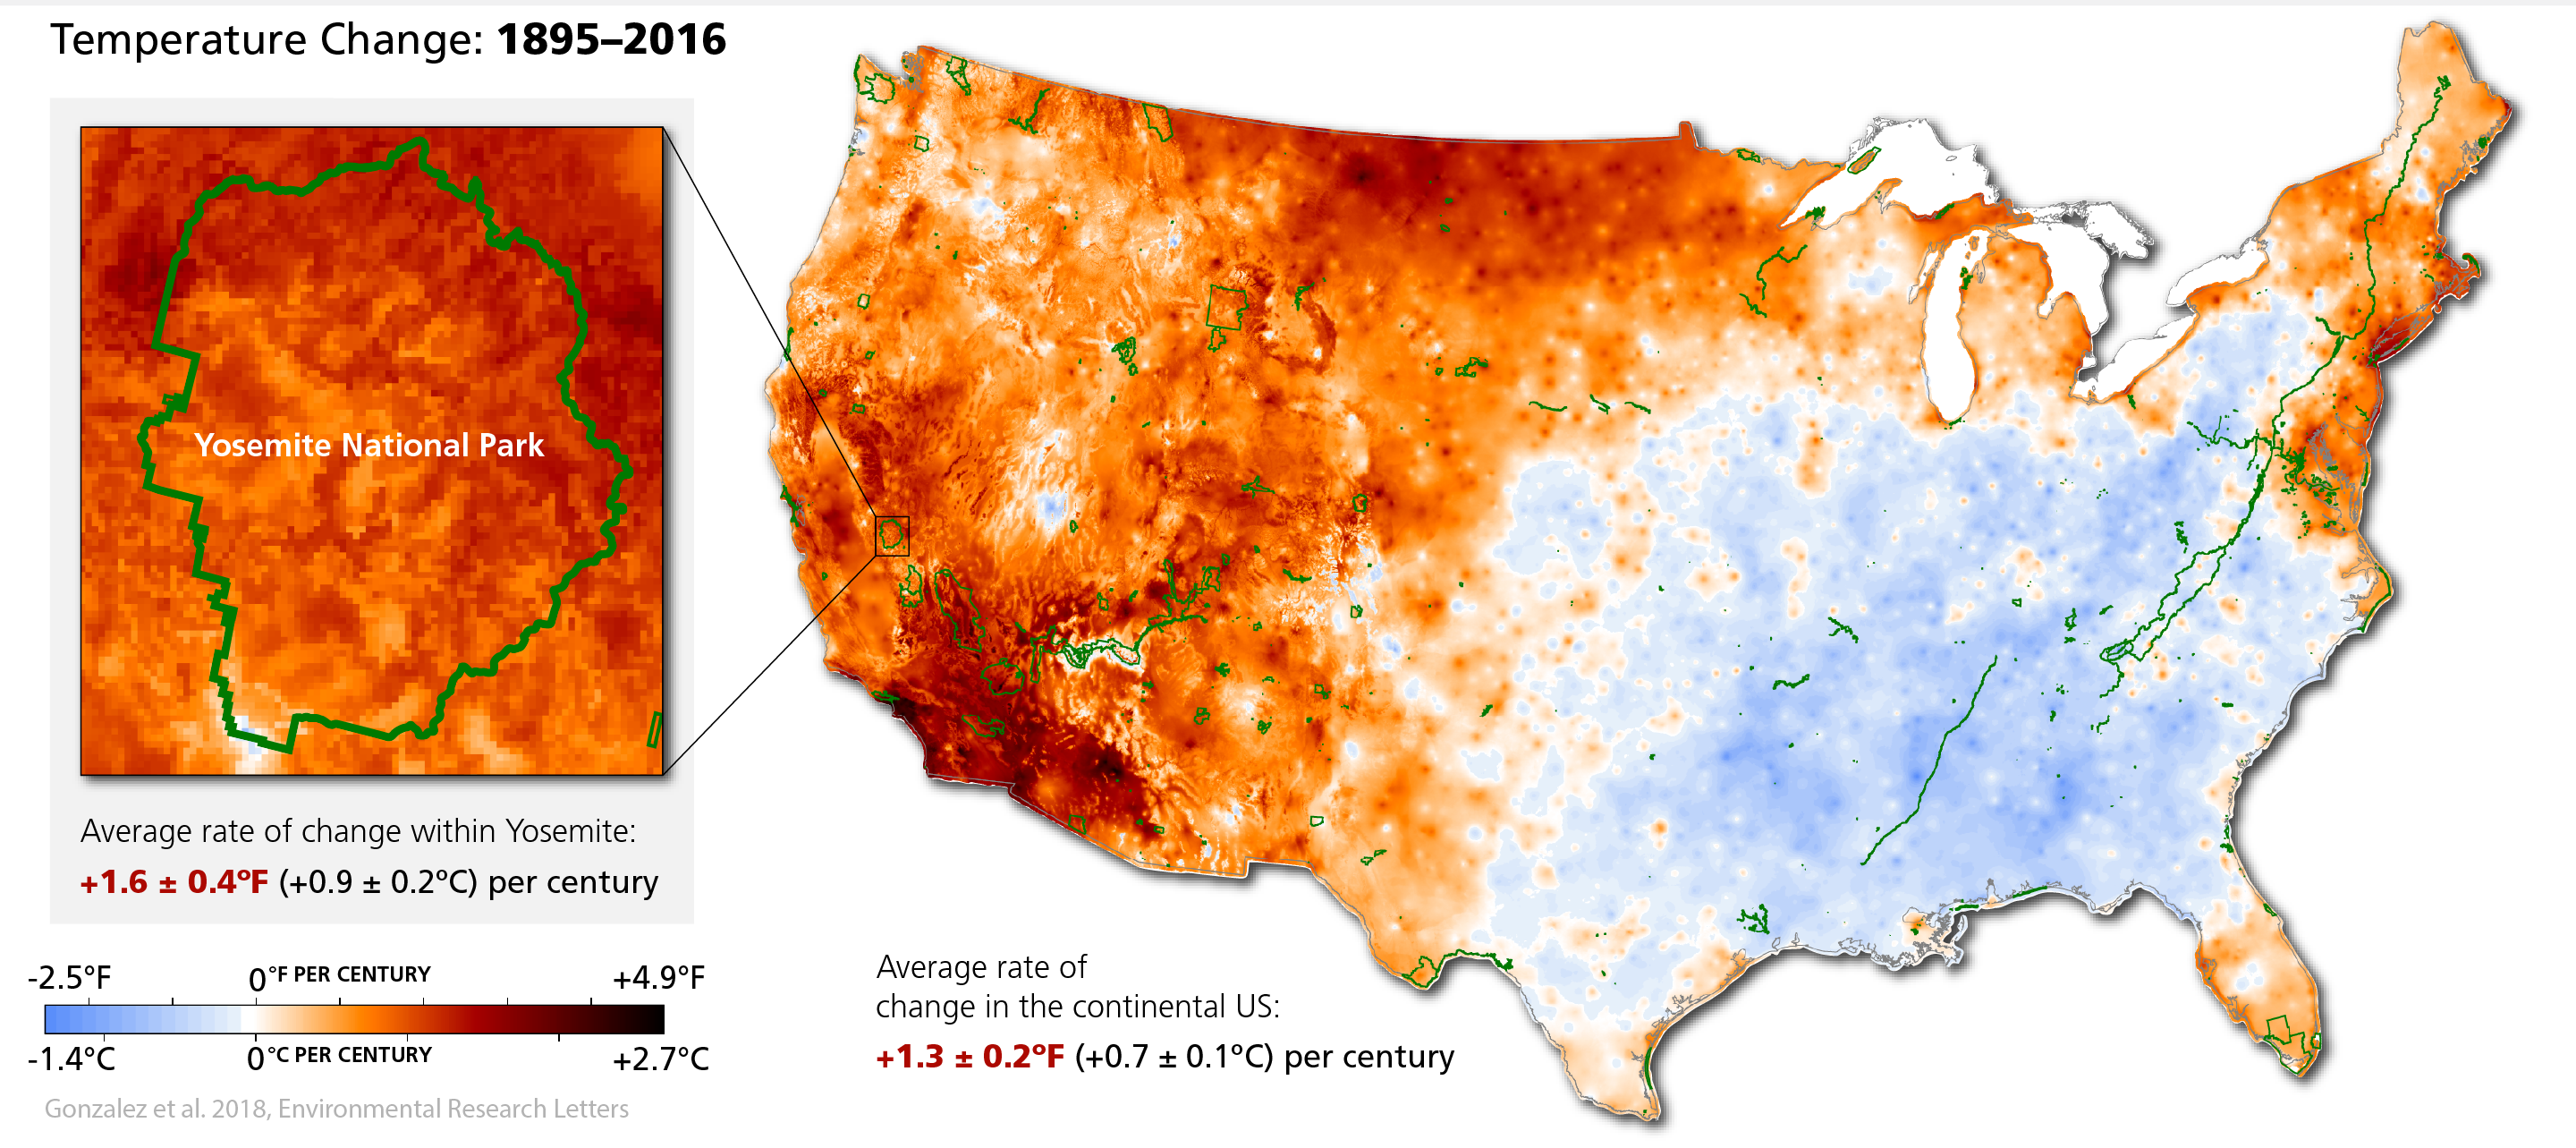 Two maps show historic temperature change across the US and in Yosemite.